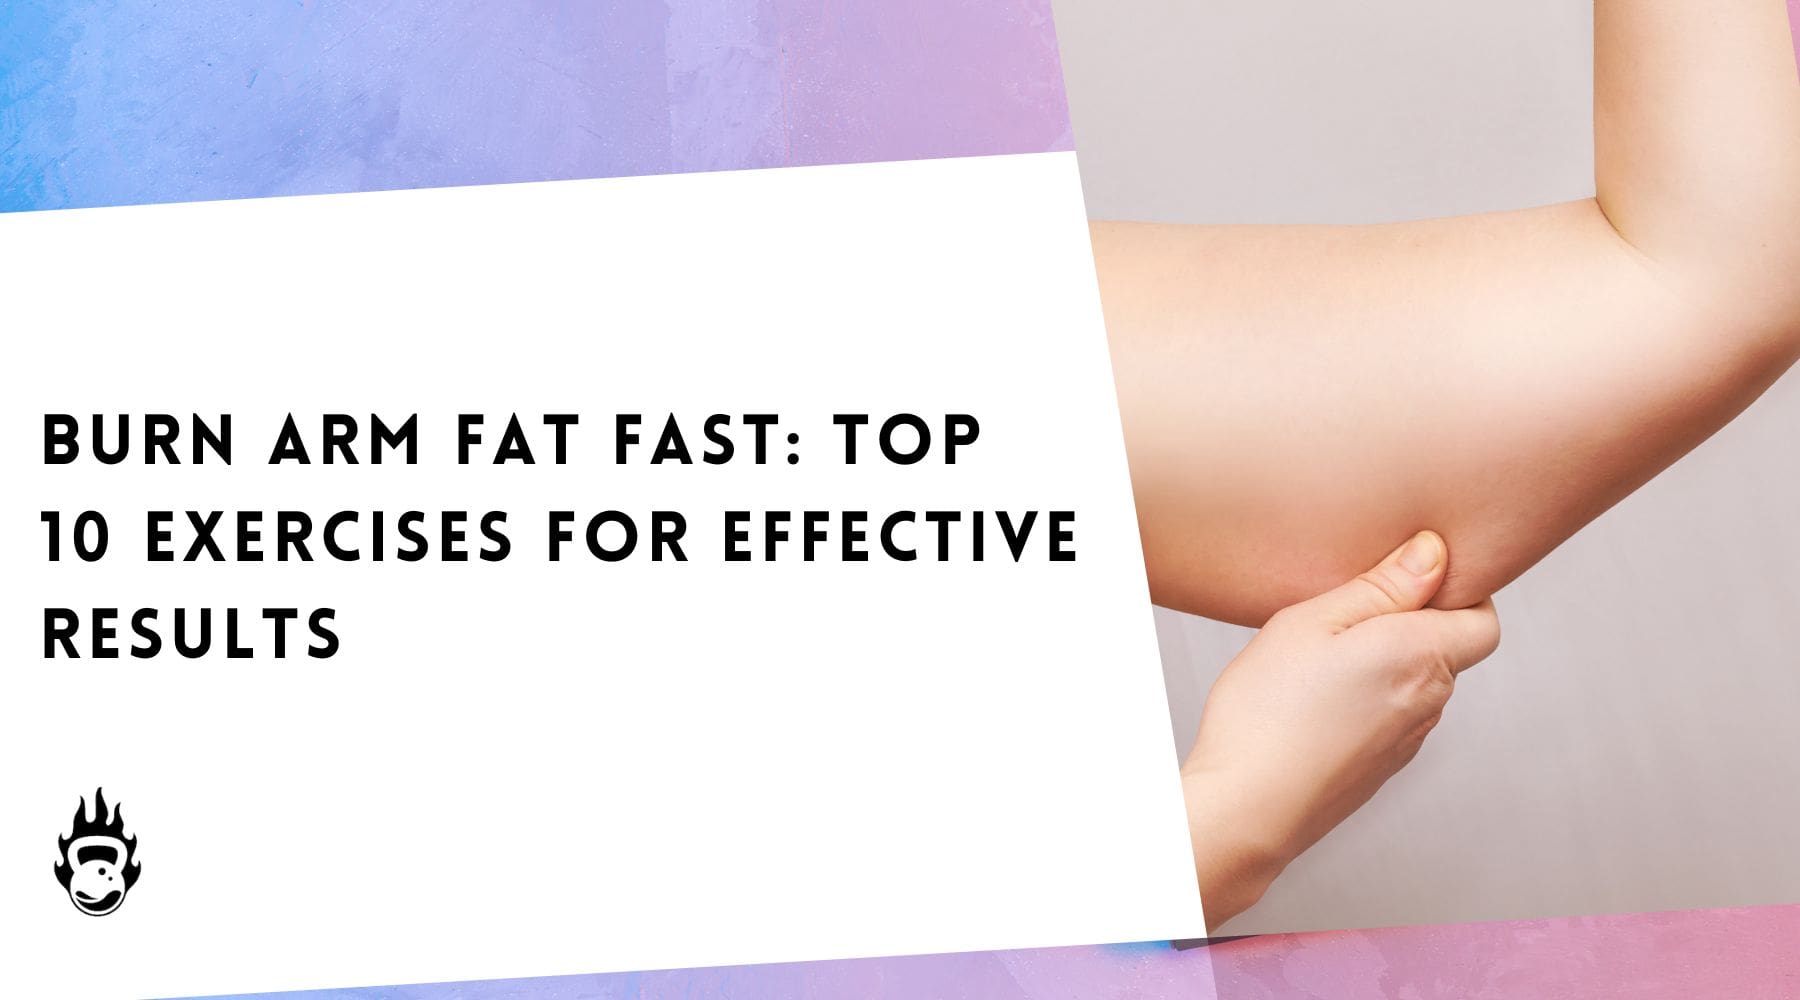 Burn Arm Fat Fast: Top 10 Exercises for Effective Results